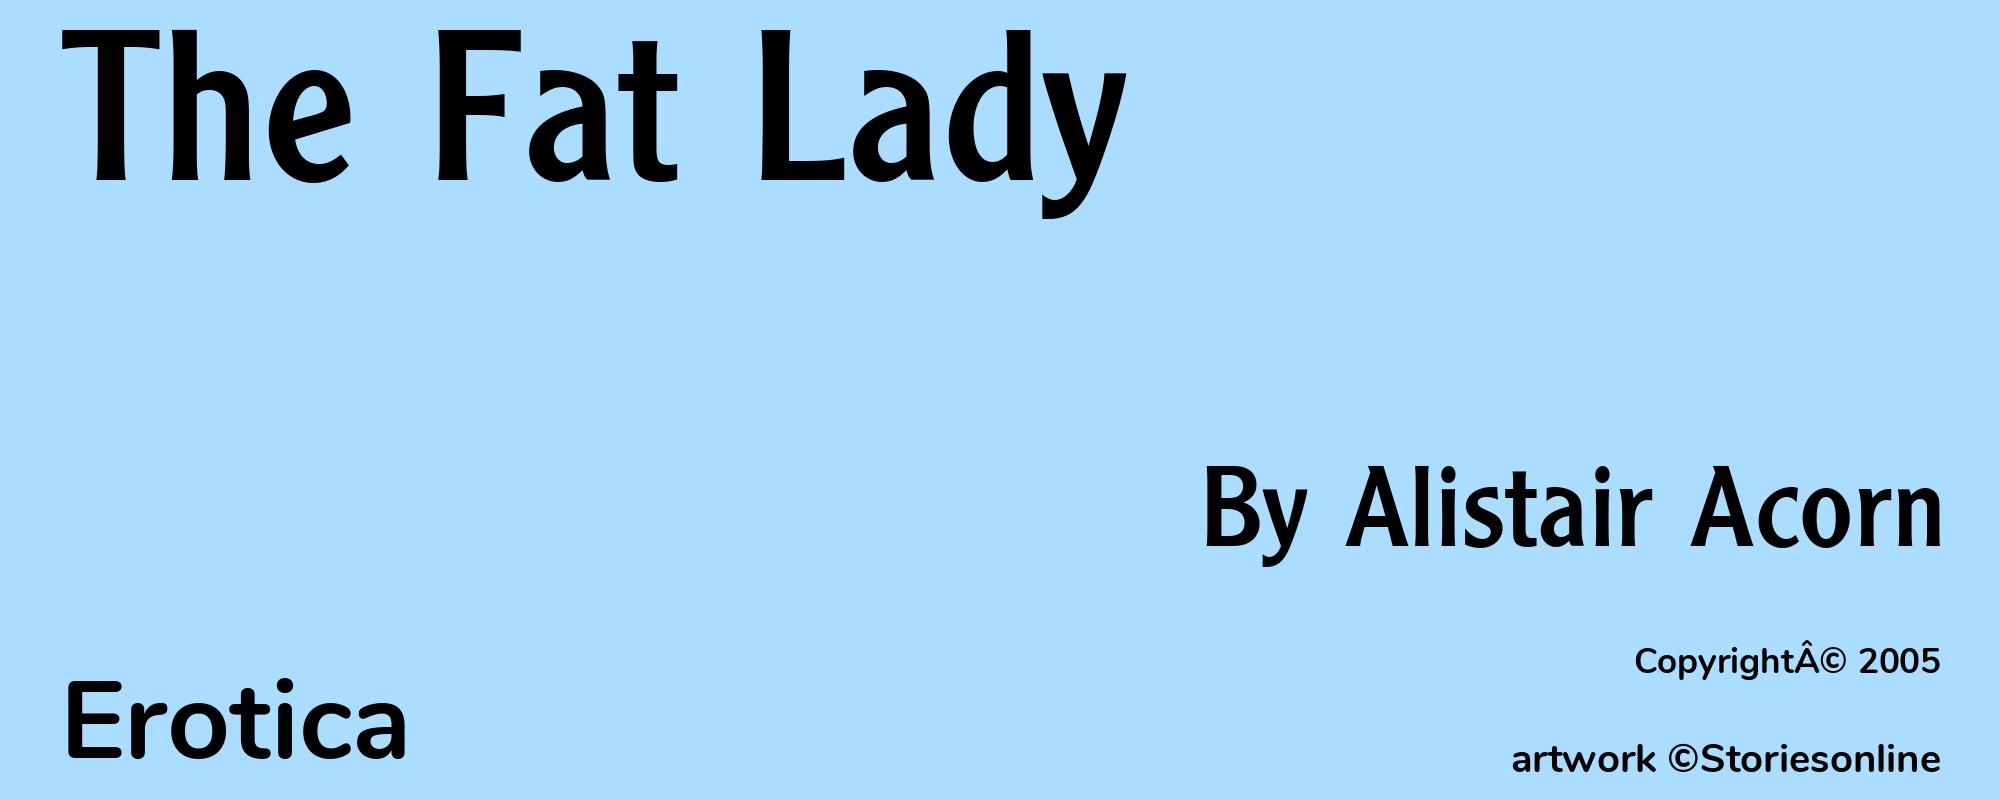 The Fat Lady - Cover